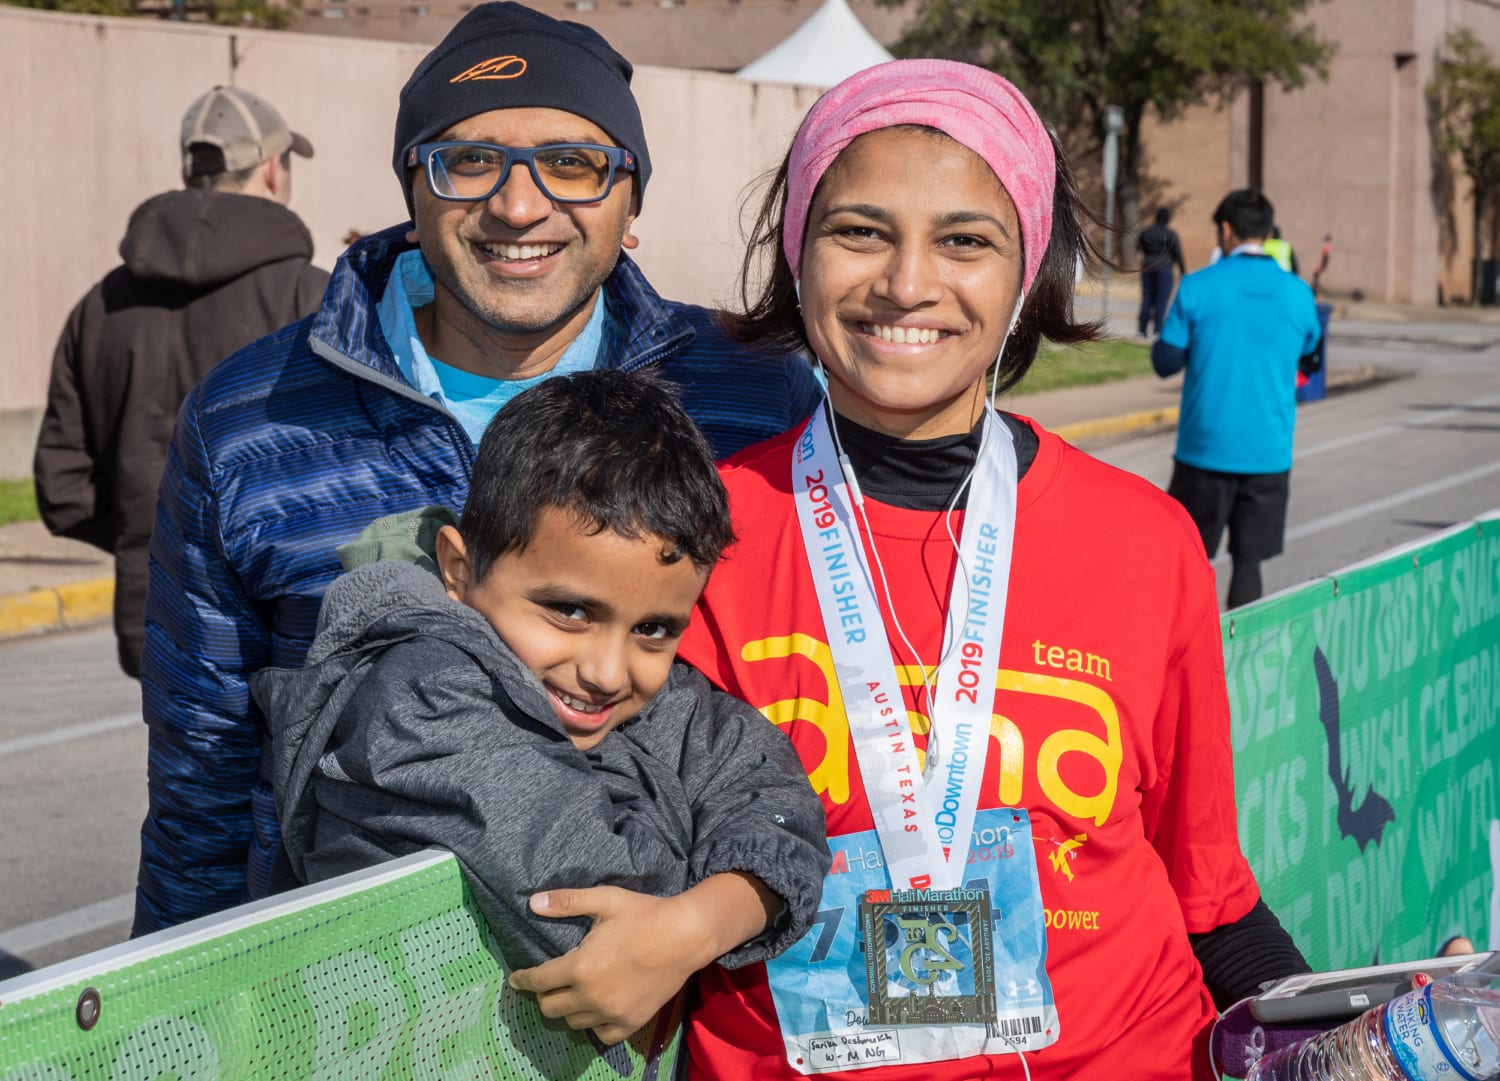 Image of a mom posing with her son and husband at the 2019 3M Half Marathon finish line. Nominate your mom in this blog post for the Mother's Day giveaway!